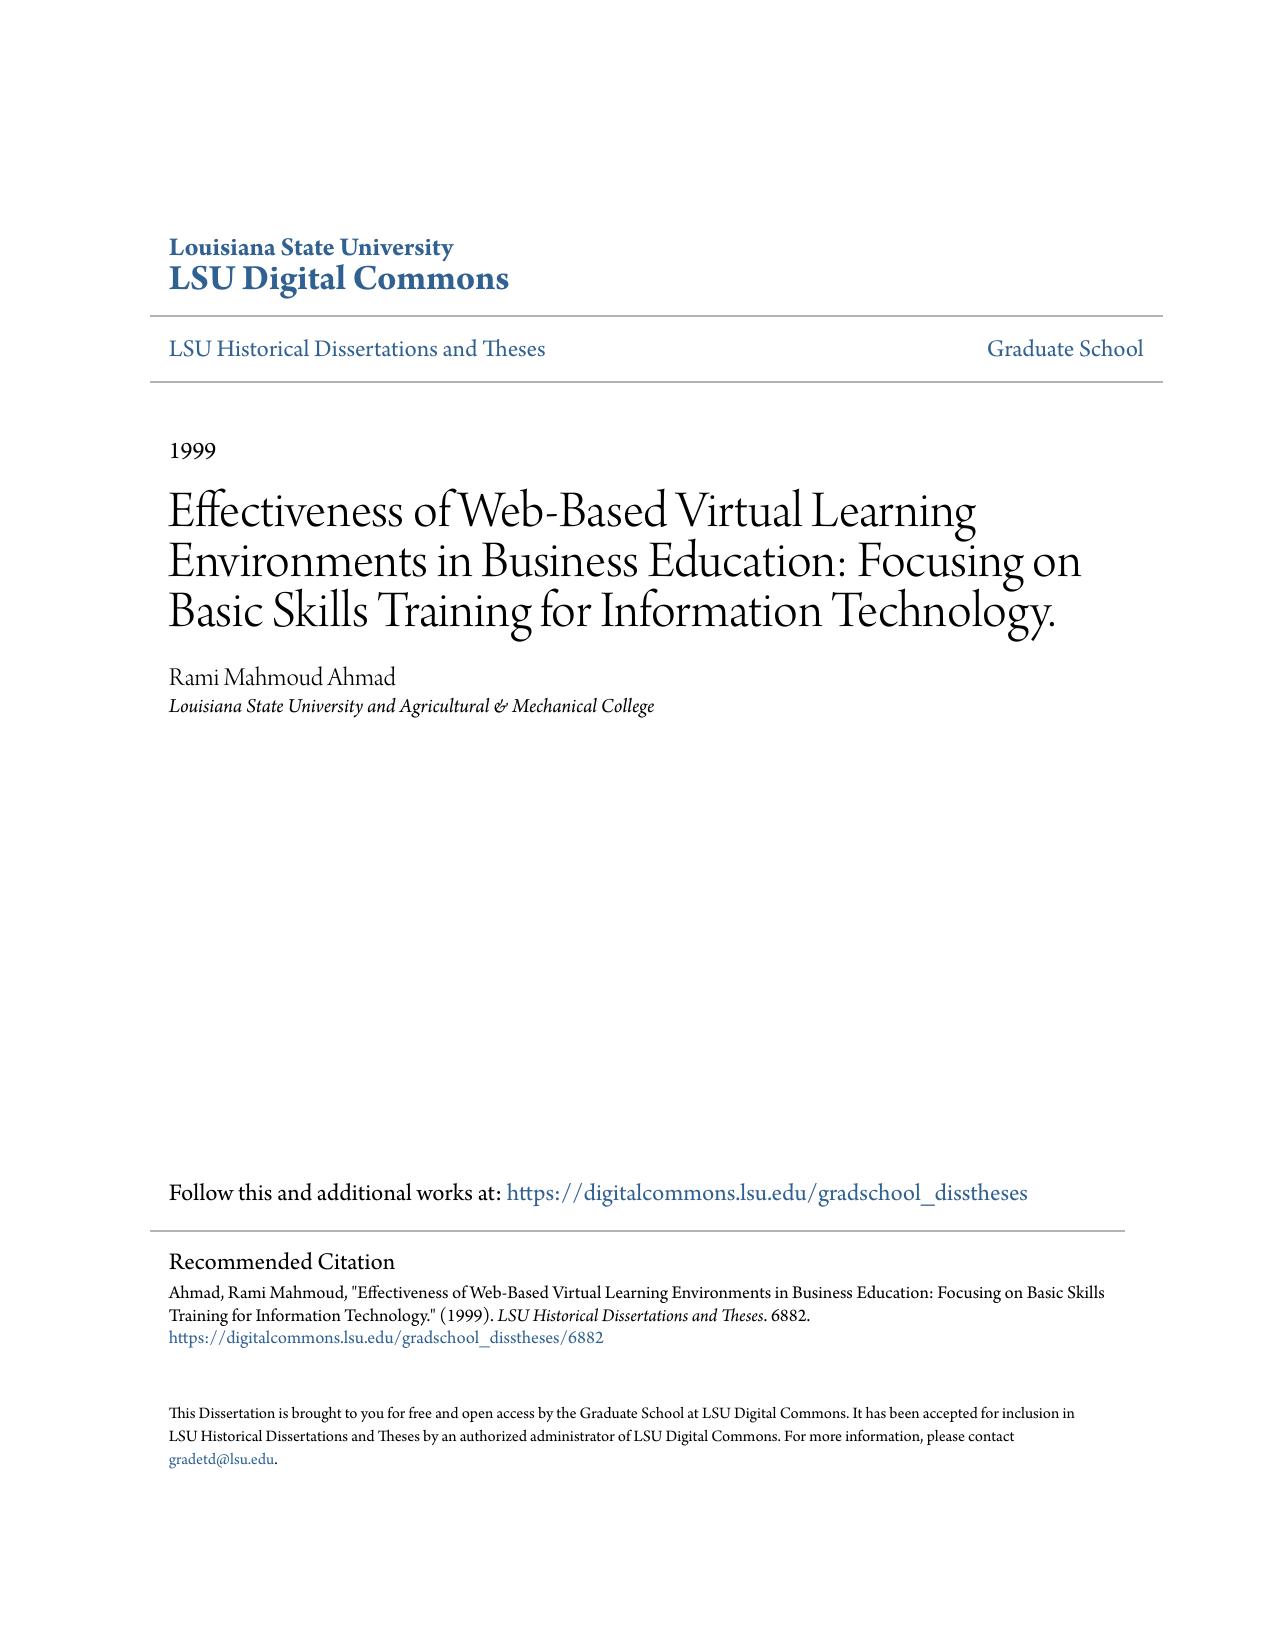 Effectiveness of Web-Based Virtual Learning Environments in Business Education: Focusing on Basic Skills Training for Information Technology.